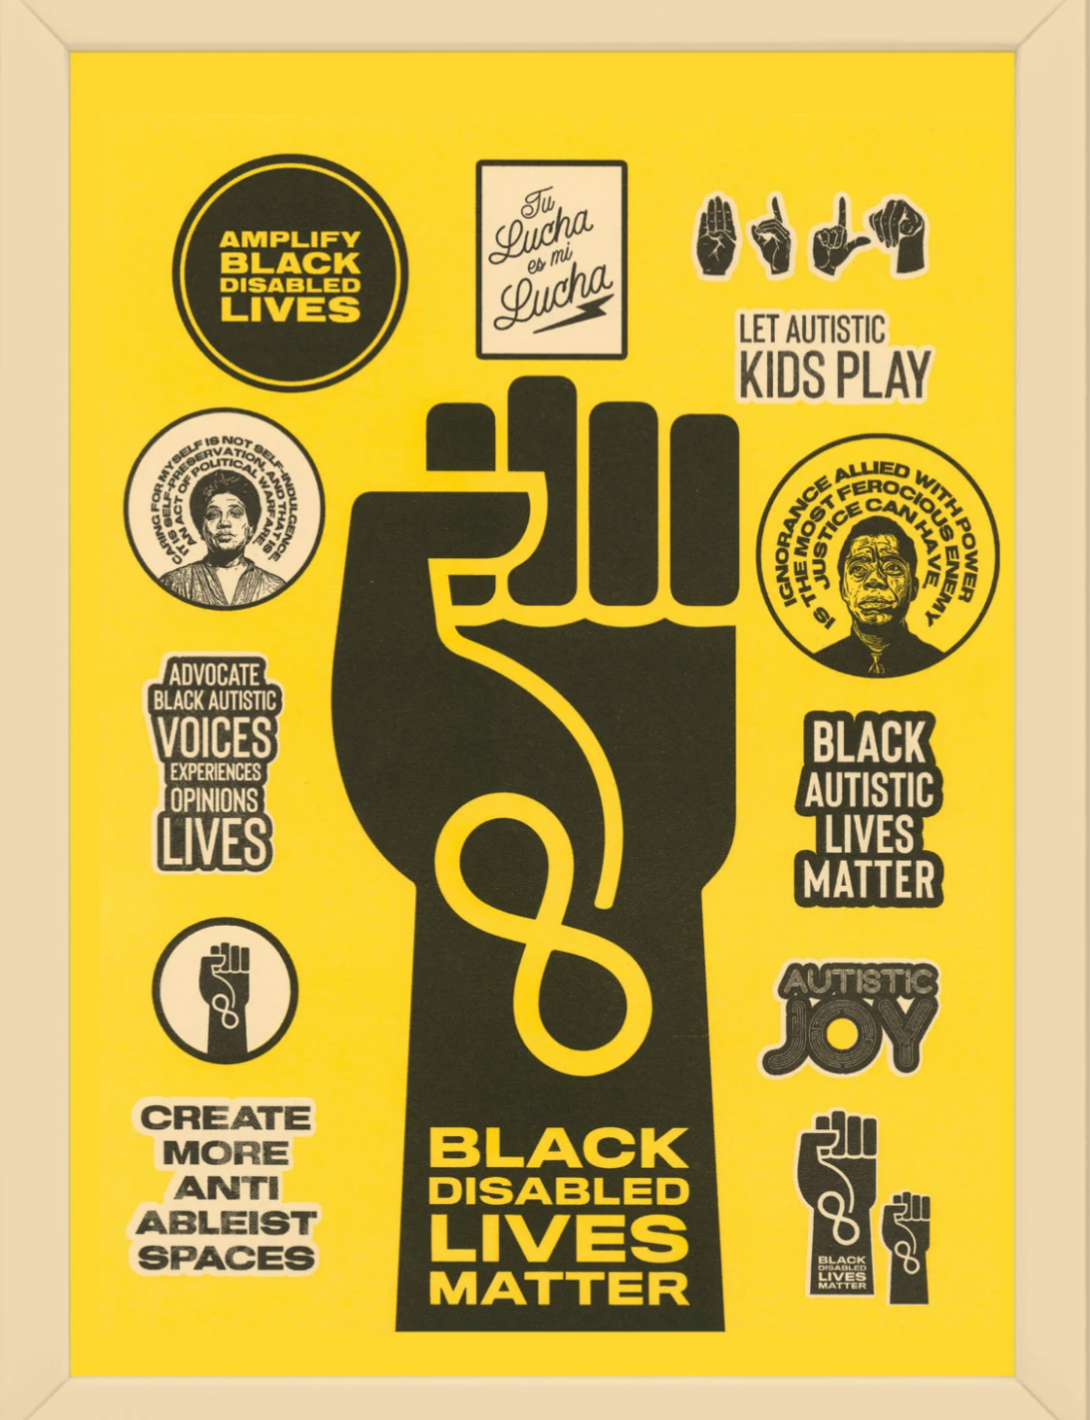 framed poster with yellow background with a large black fist with an infinity symbol and the words Black disabled lives matter in the center surrounded by various quotes in black and white.